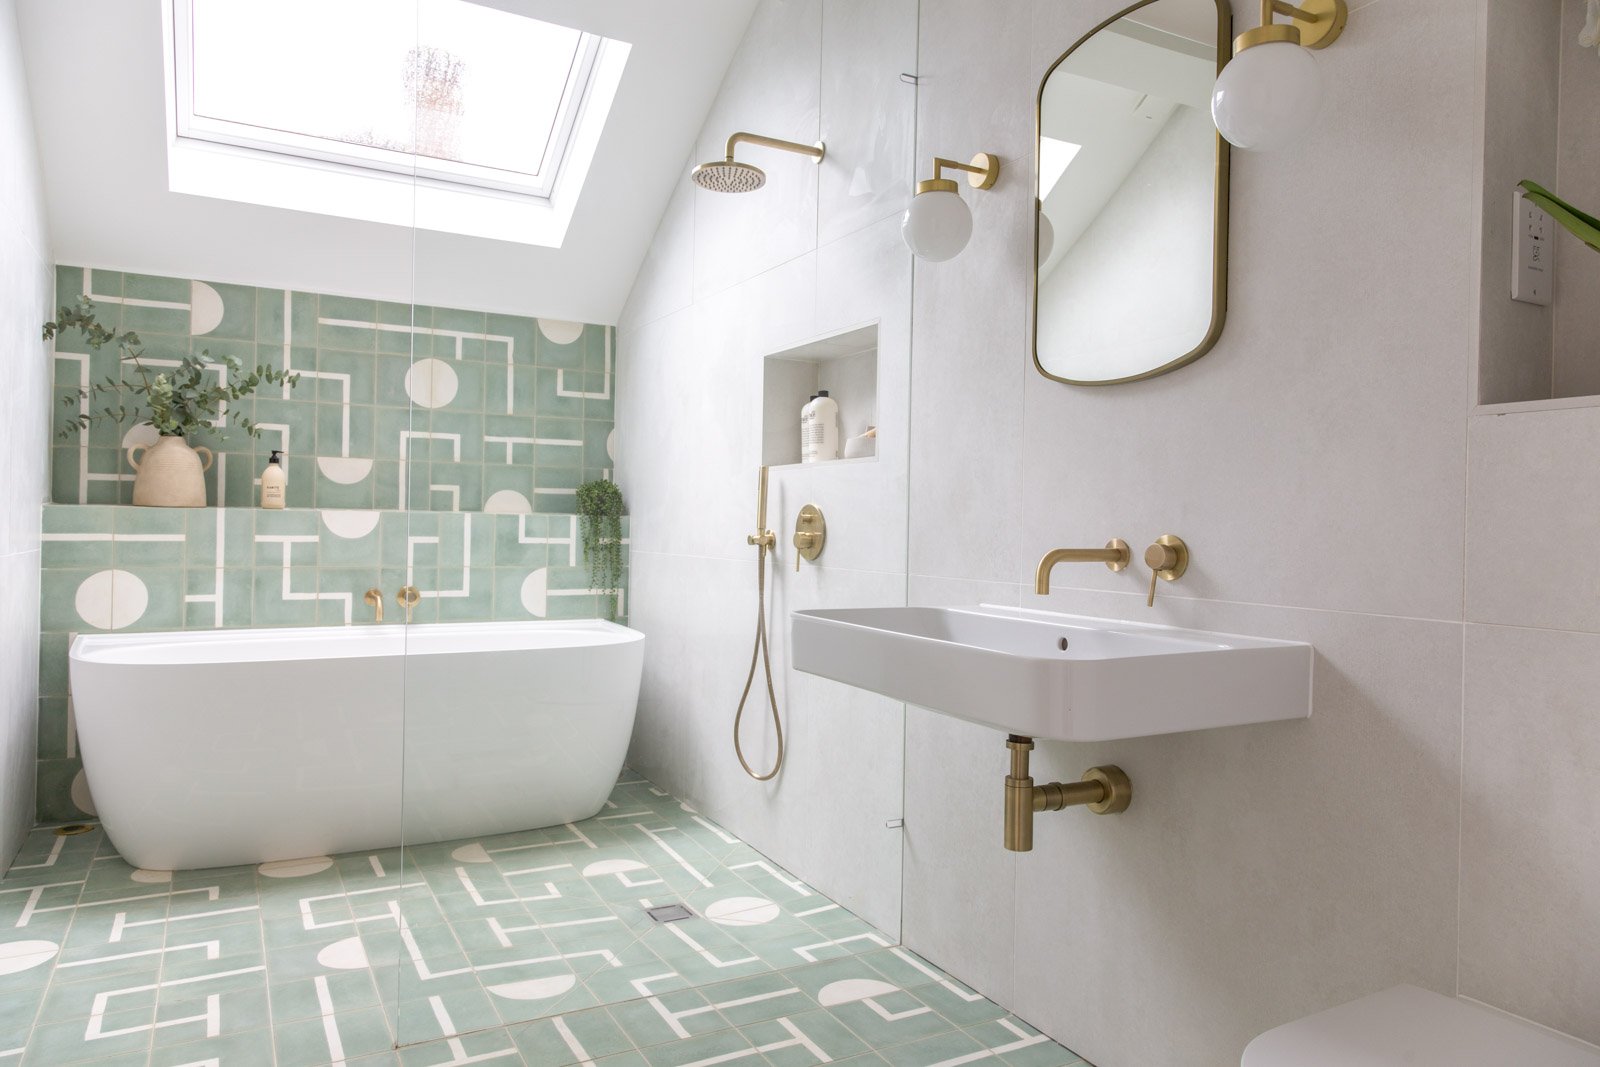 Bathroom lighting in George Clarke's 'Ugly house to Lovely House'